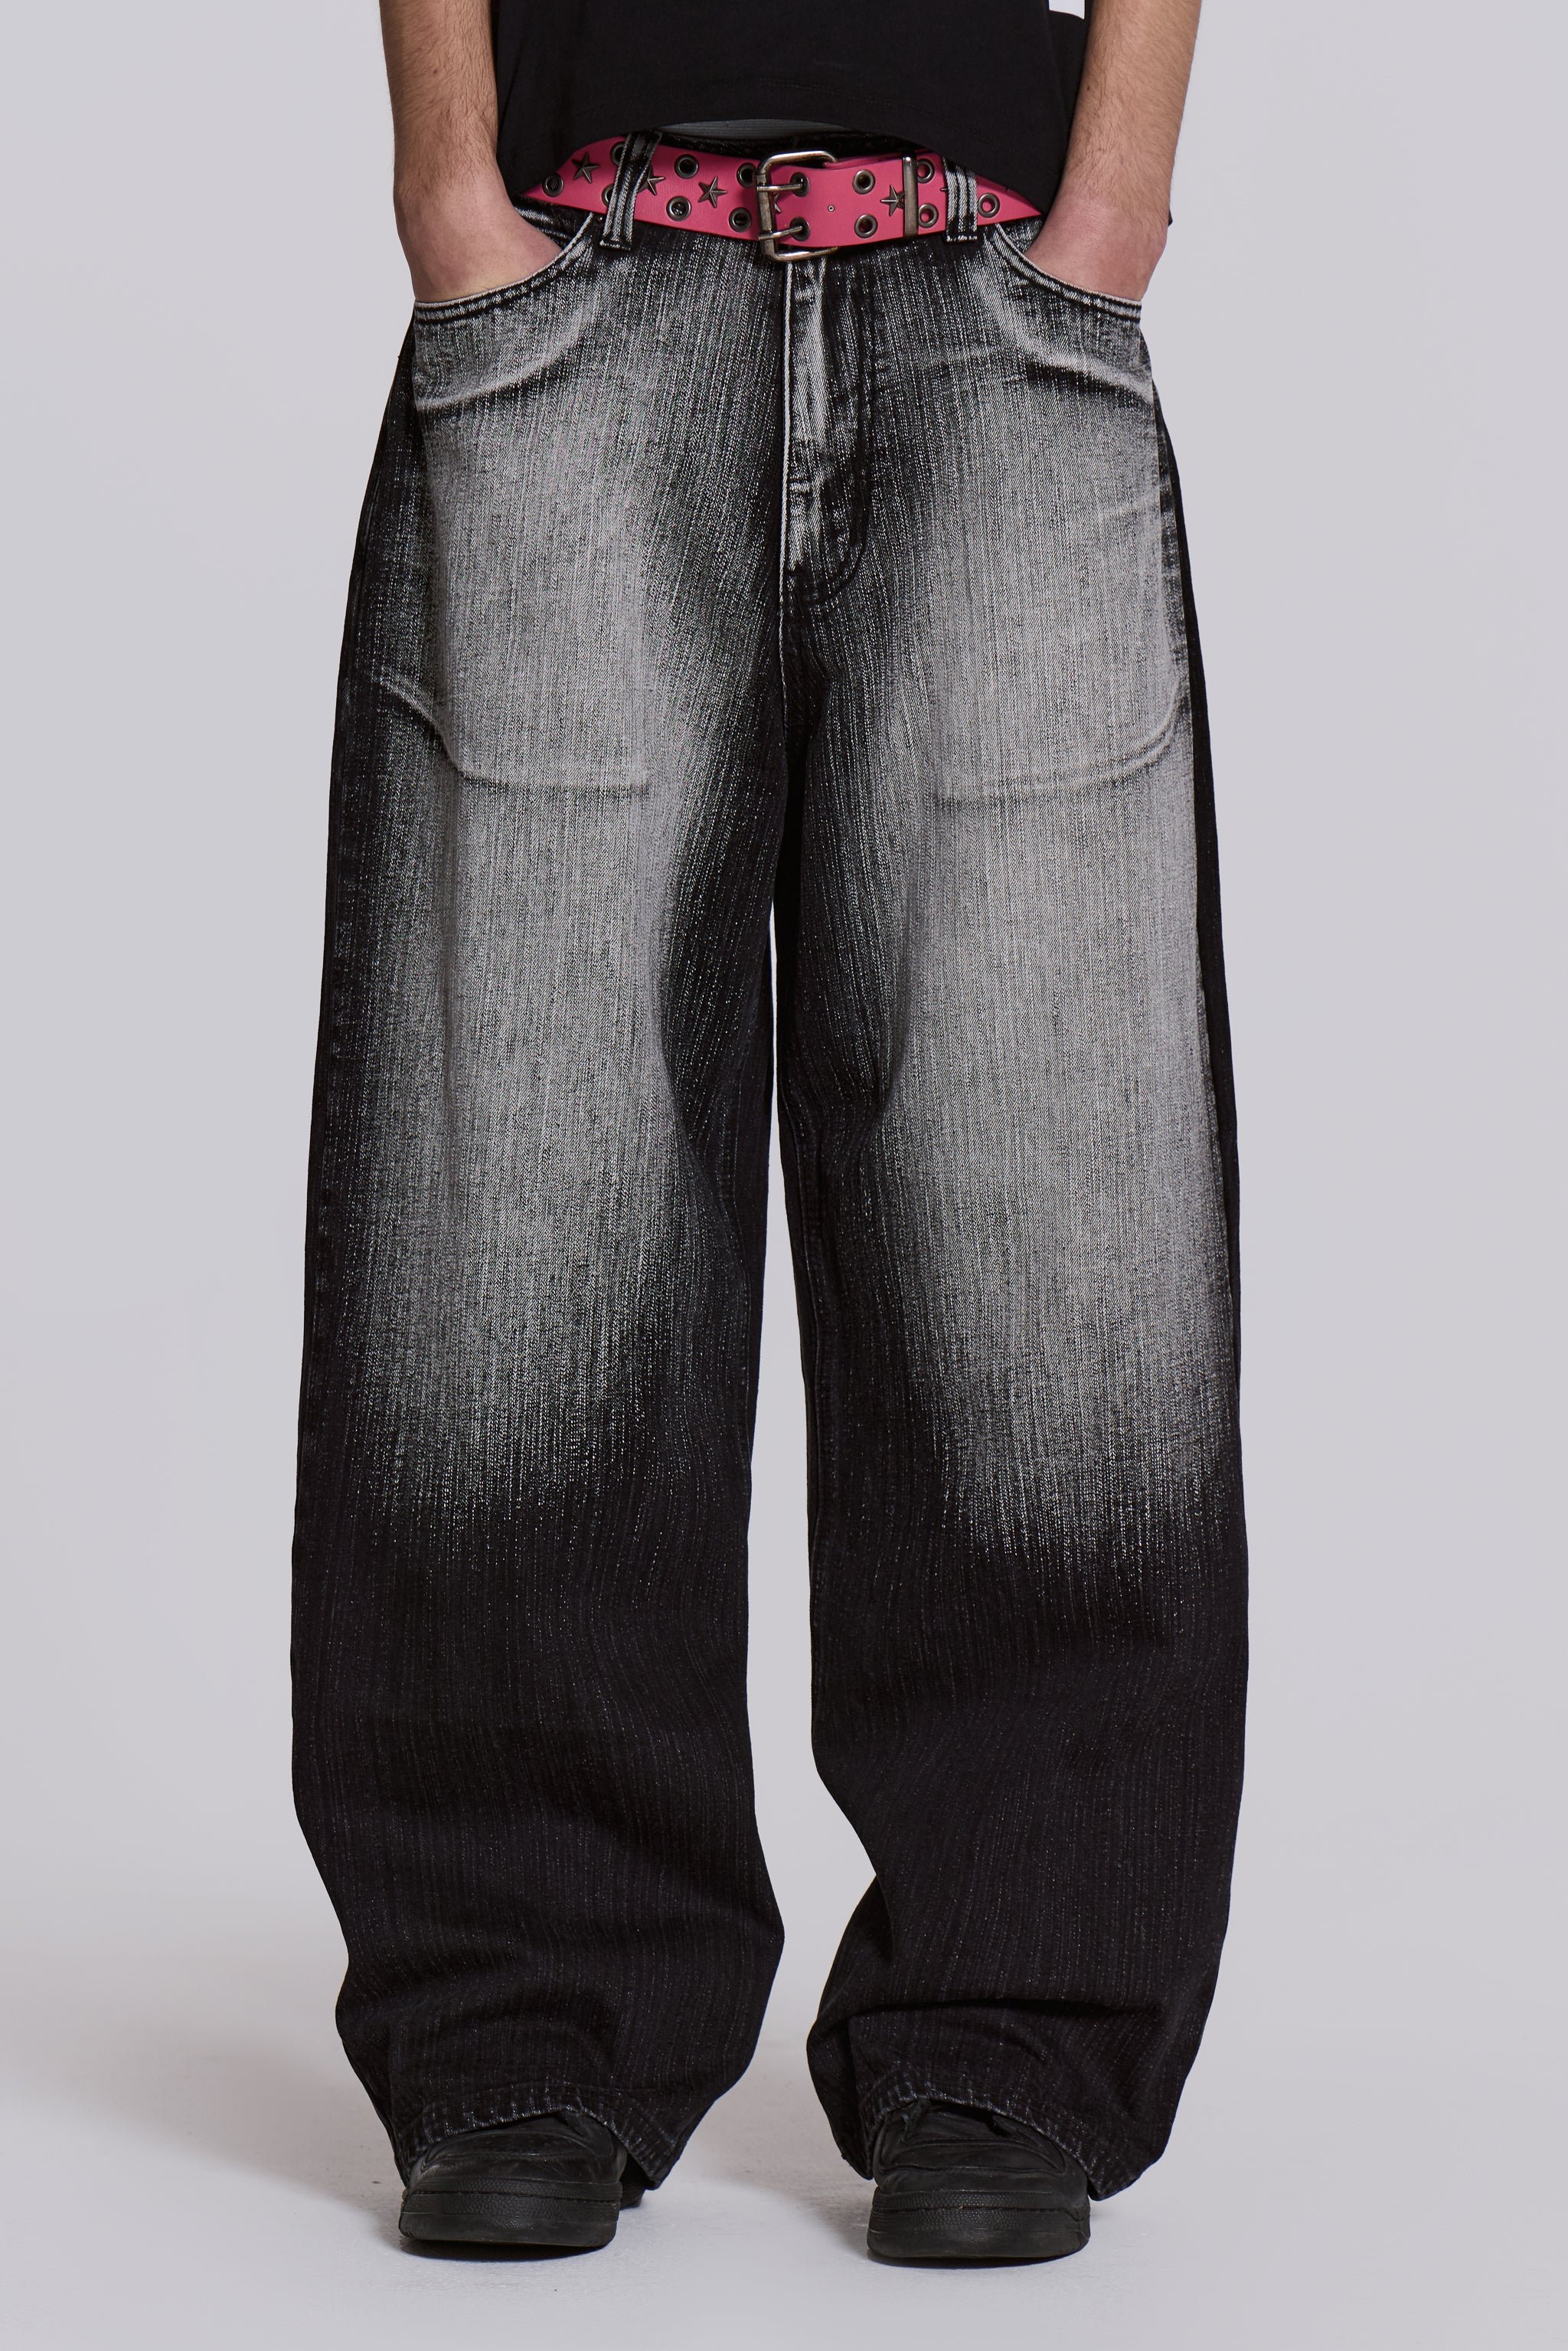 Black White Wash XL Colossus Jeans | Jaded London